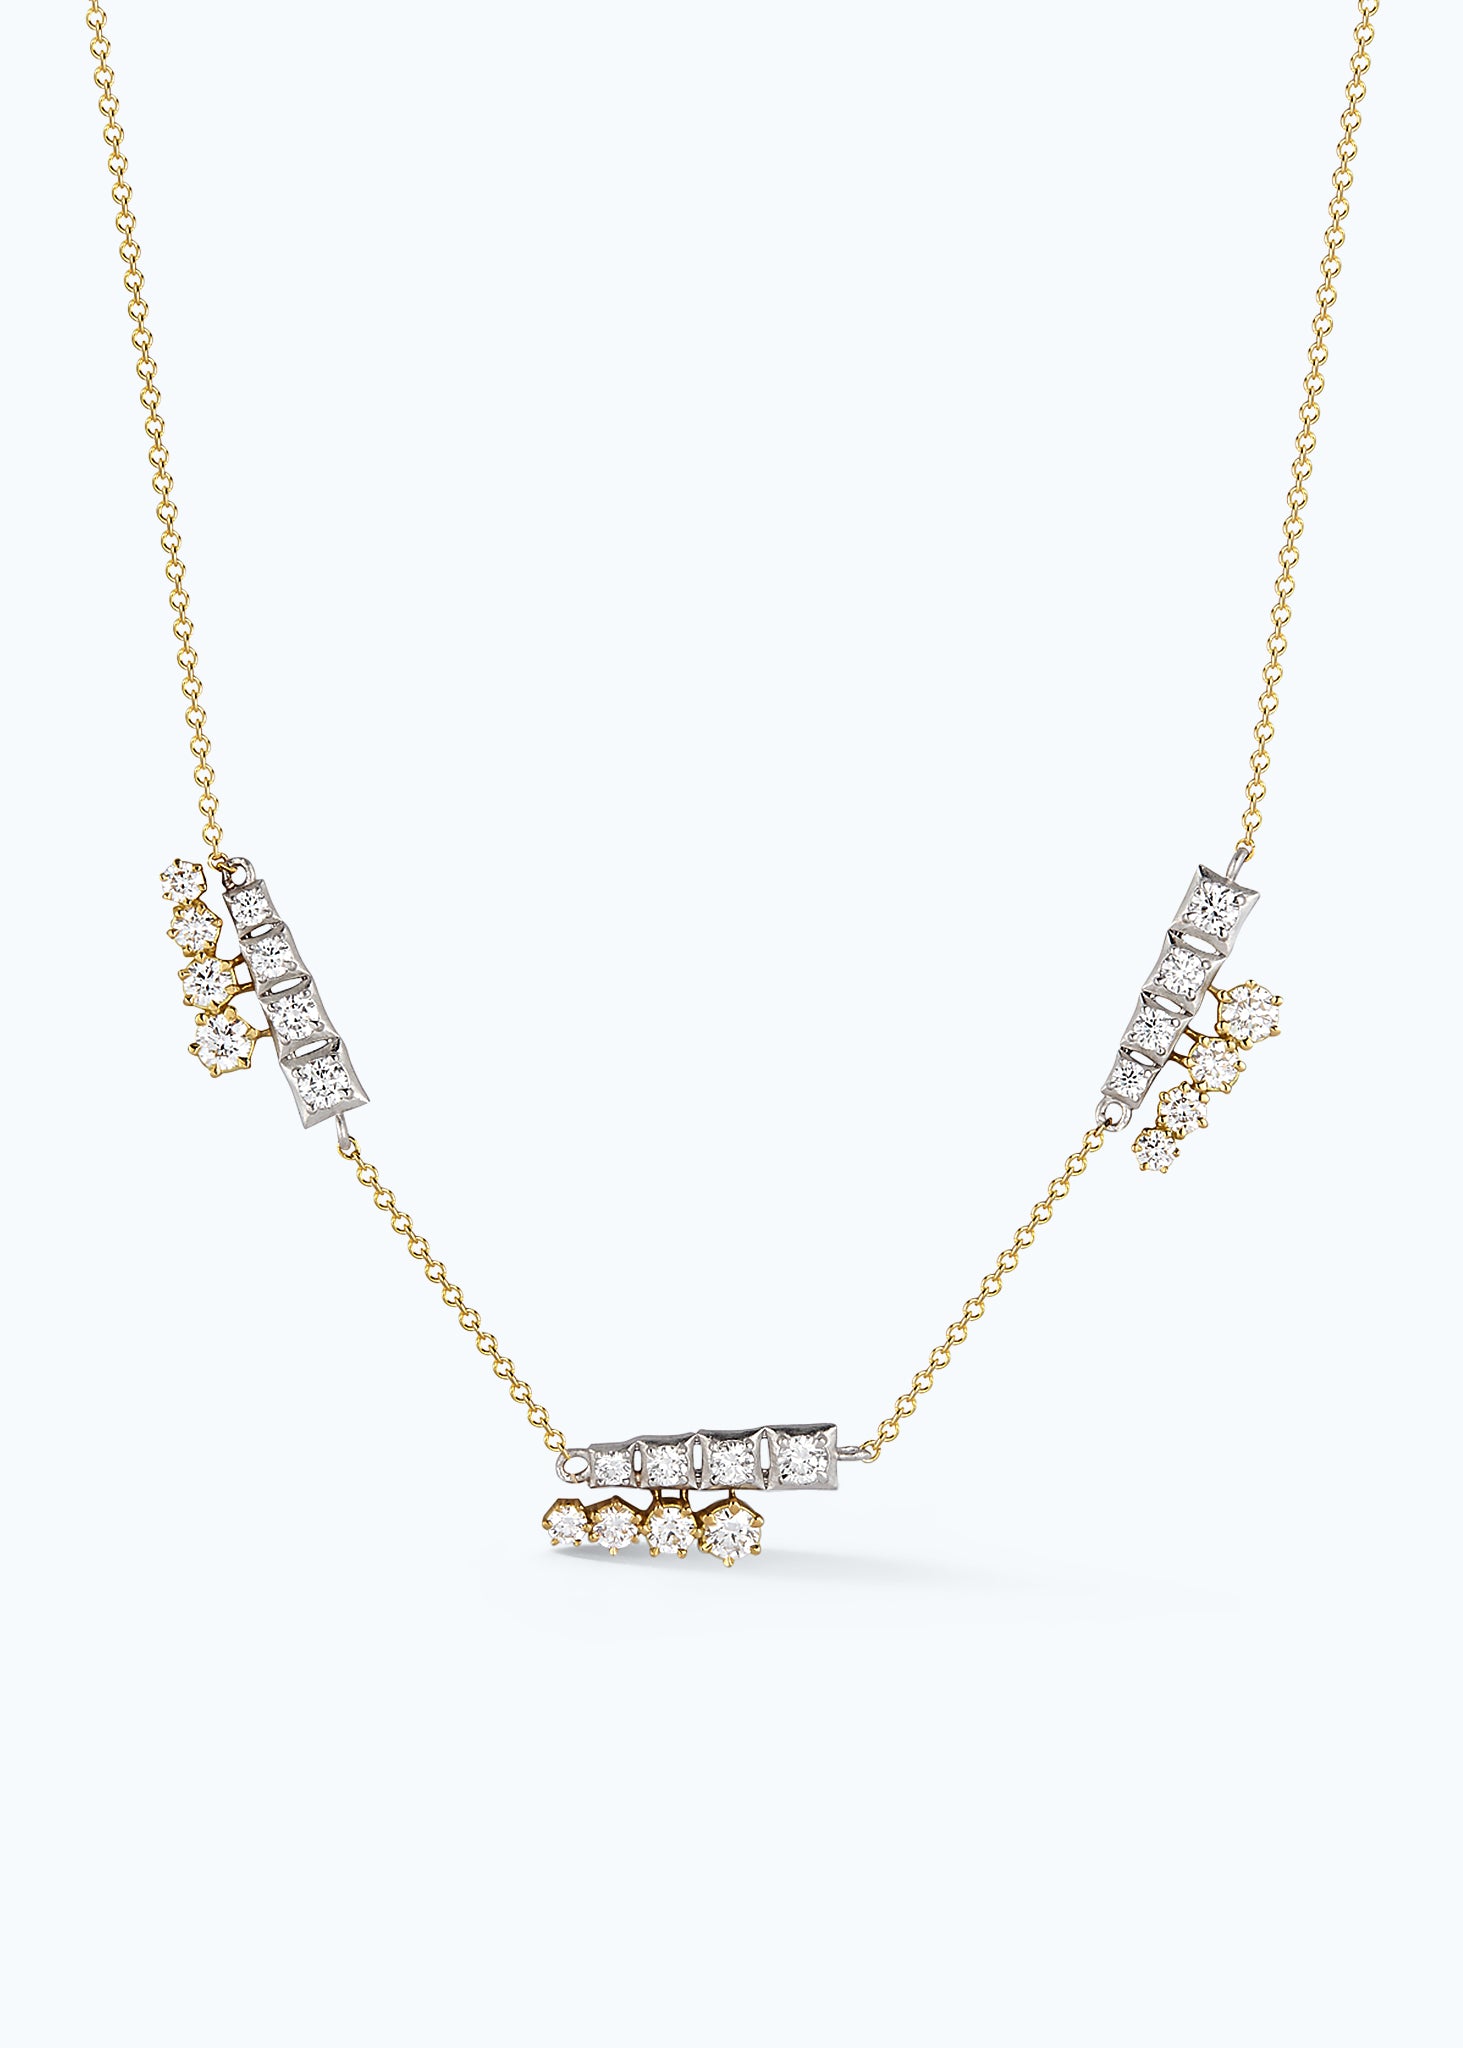 Harlow Two-Tone 3 Station Necklace in Yellow Gold and Platinum